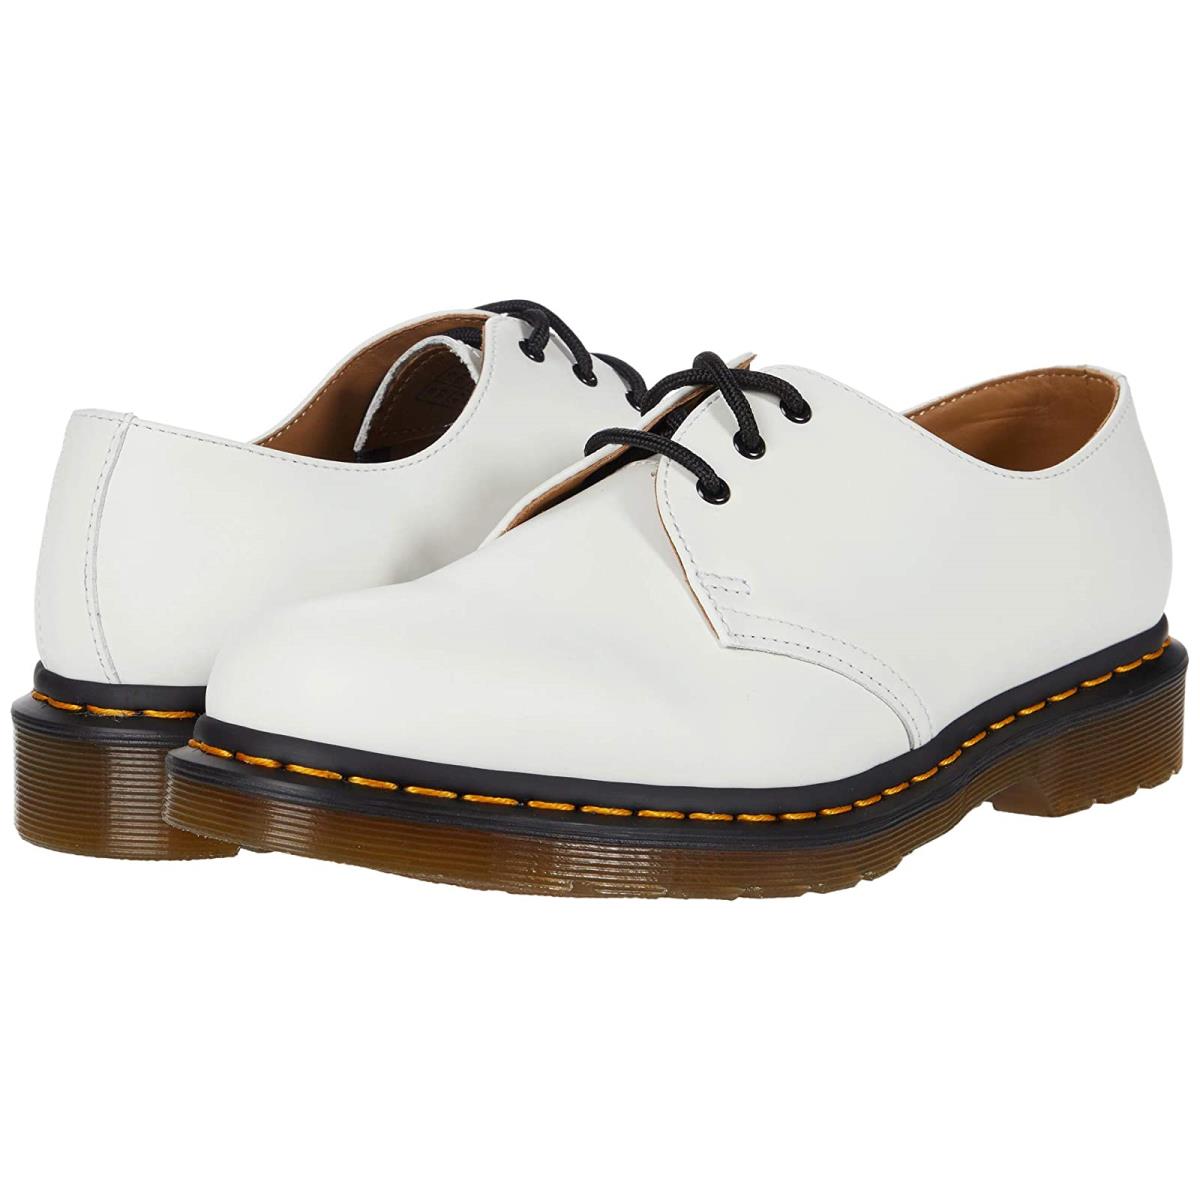 Unisex Oxfords Dr. Martens 1461 Smooth Leather Shoes White Smooth